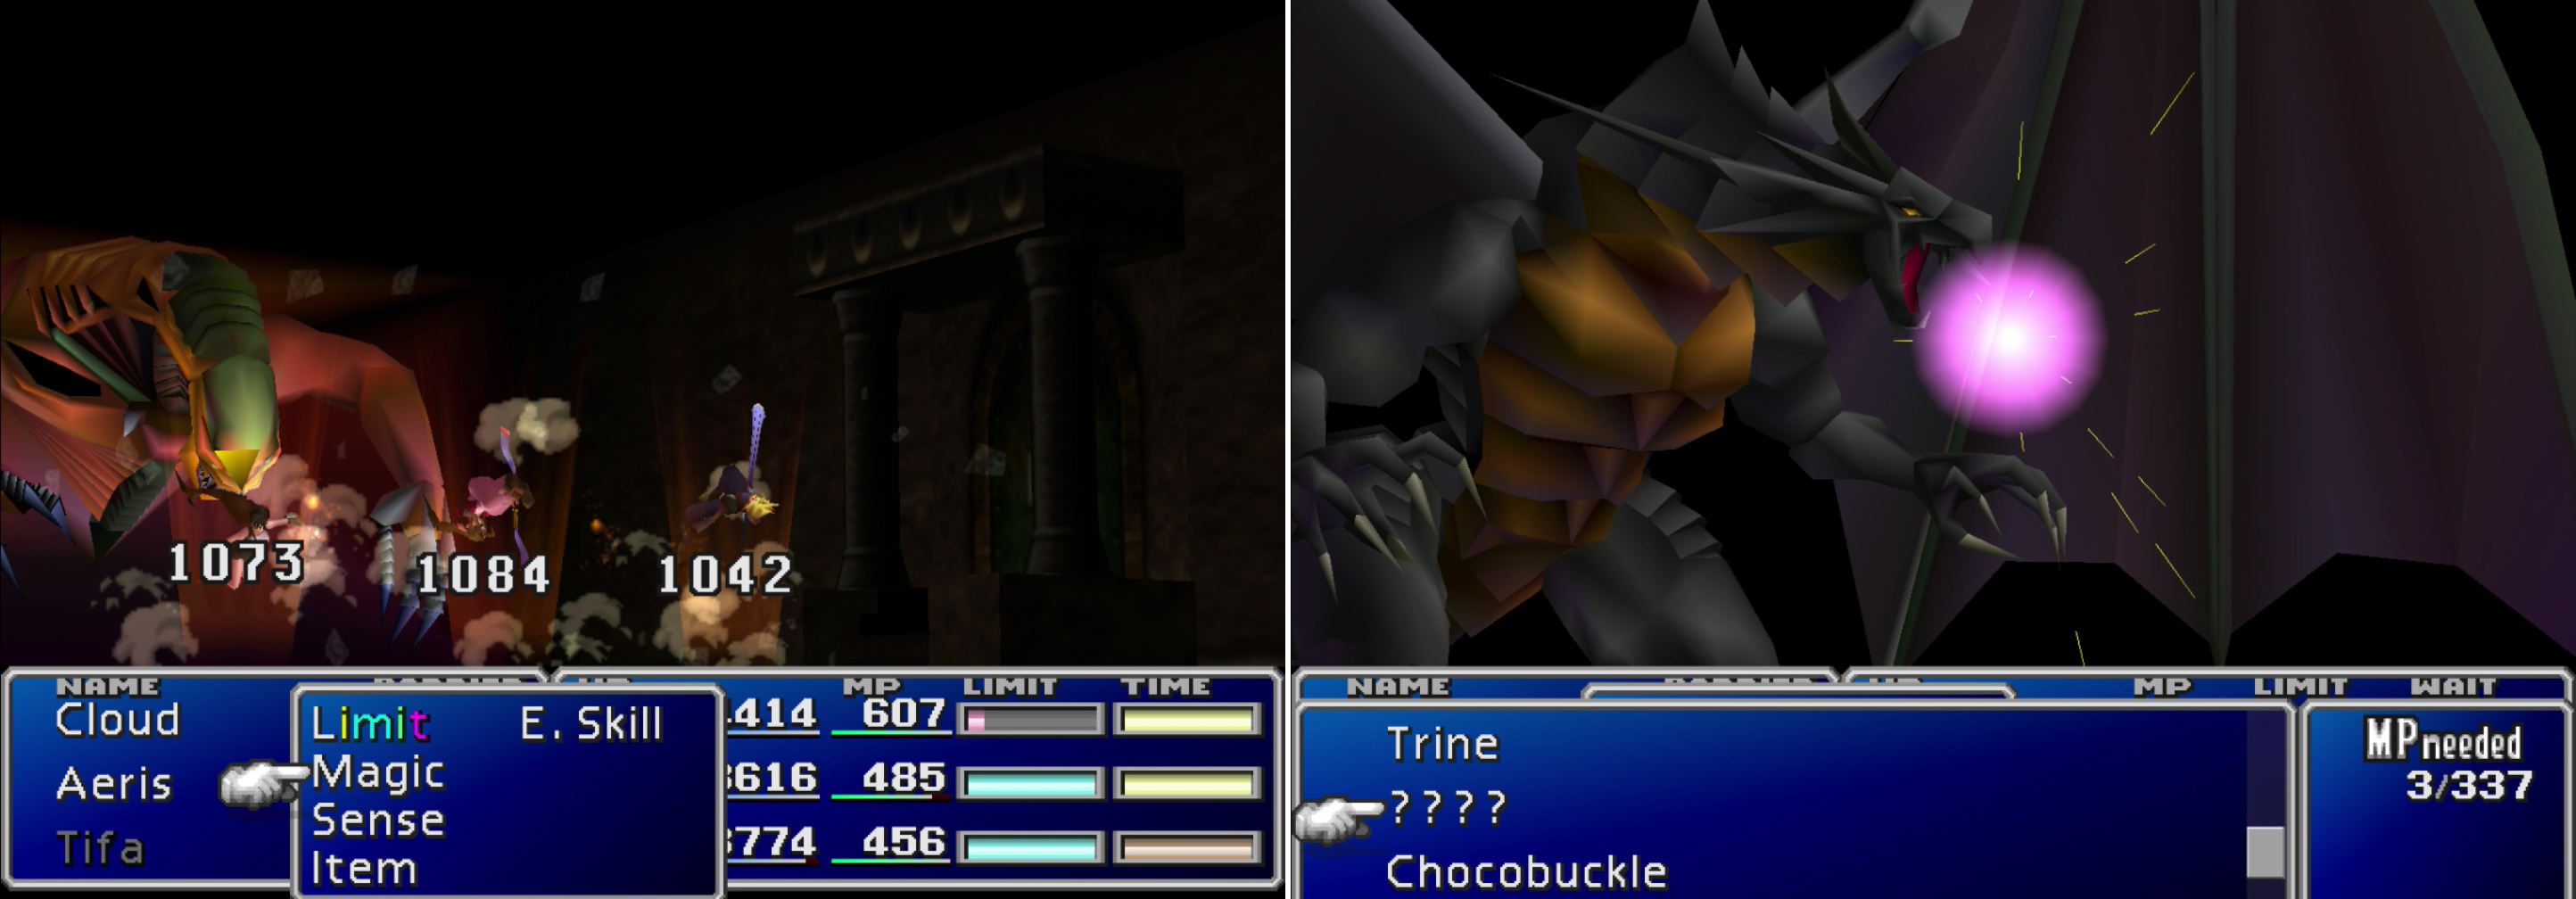 The Demons Gate's "Demon Rush" attack can deal heavy damage to the entire party (left). Consider employing your new-found Bahamut Materia to shave off a hefty chunk of damage from this boss (right).